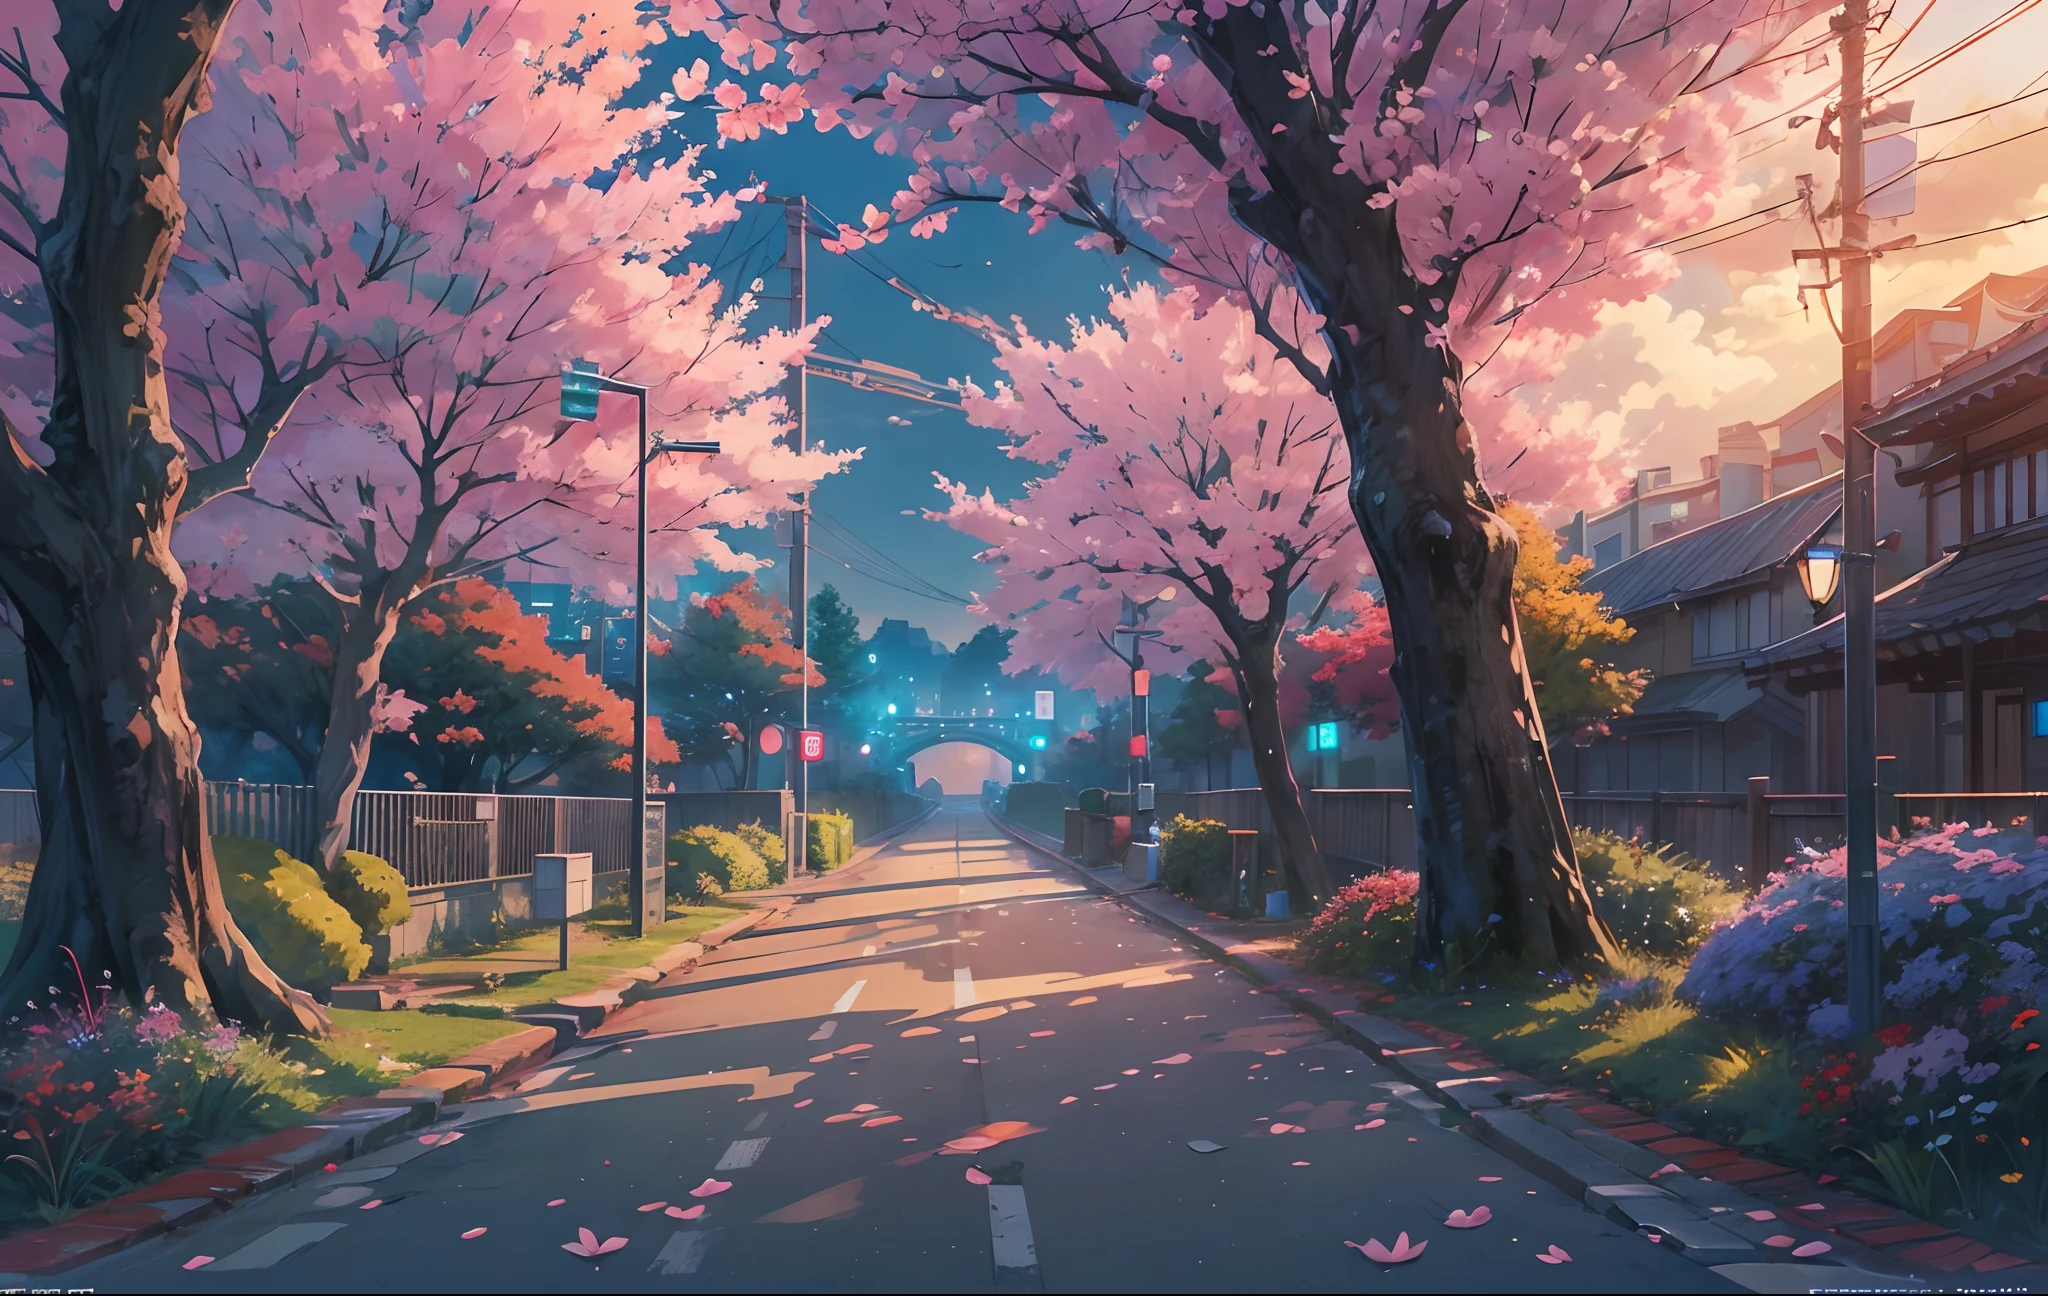 masterpiece, concept art, wide shot, panoramic, a park at night with a bridge in the distance, a detailed matte painting, by Makoto Shinkai, widescreen shot, driveway, sakura trees-lined path at sunset, miyazaki's animated film, endless night, sakura trees along street, art for the film in color, detailed digital anime art, (epic composition, epic proportion), HD